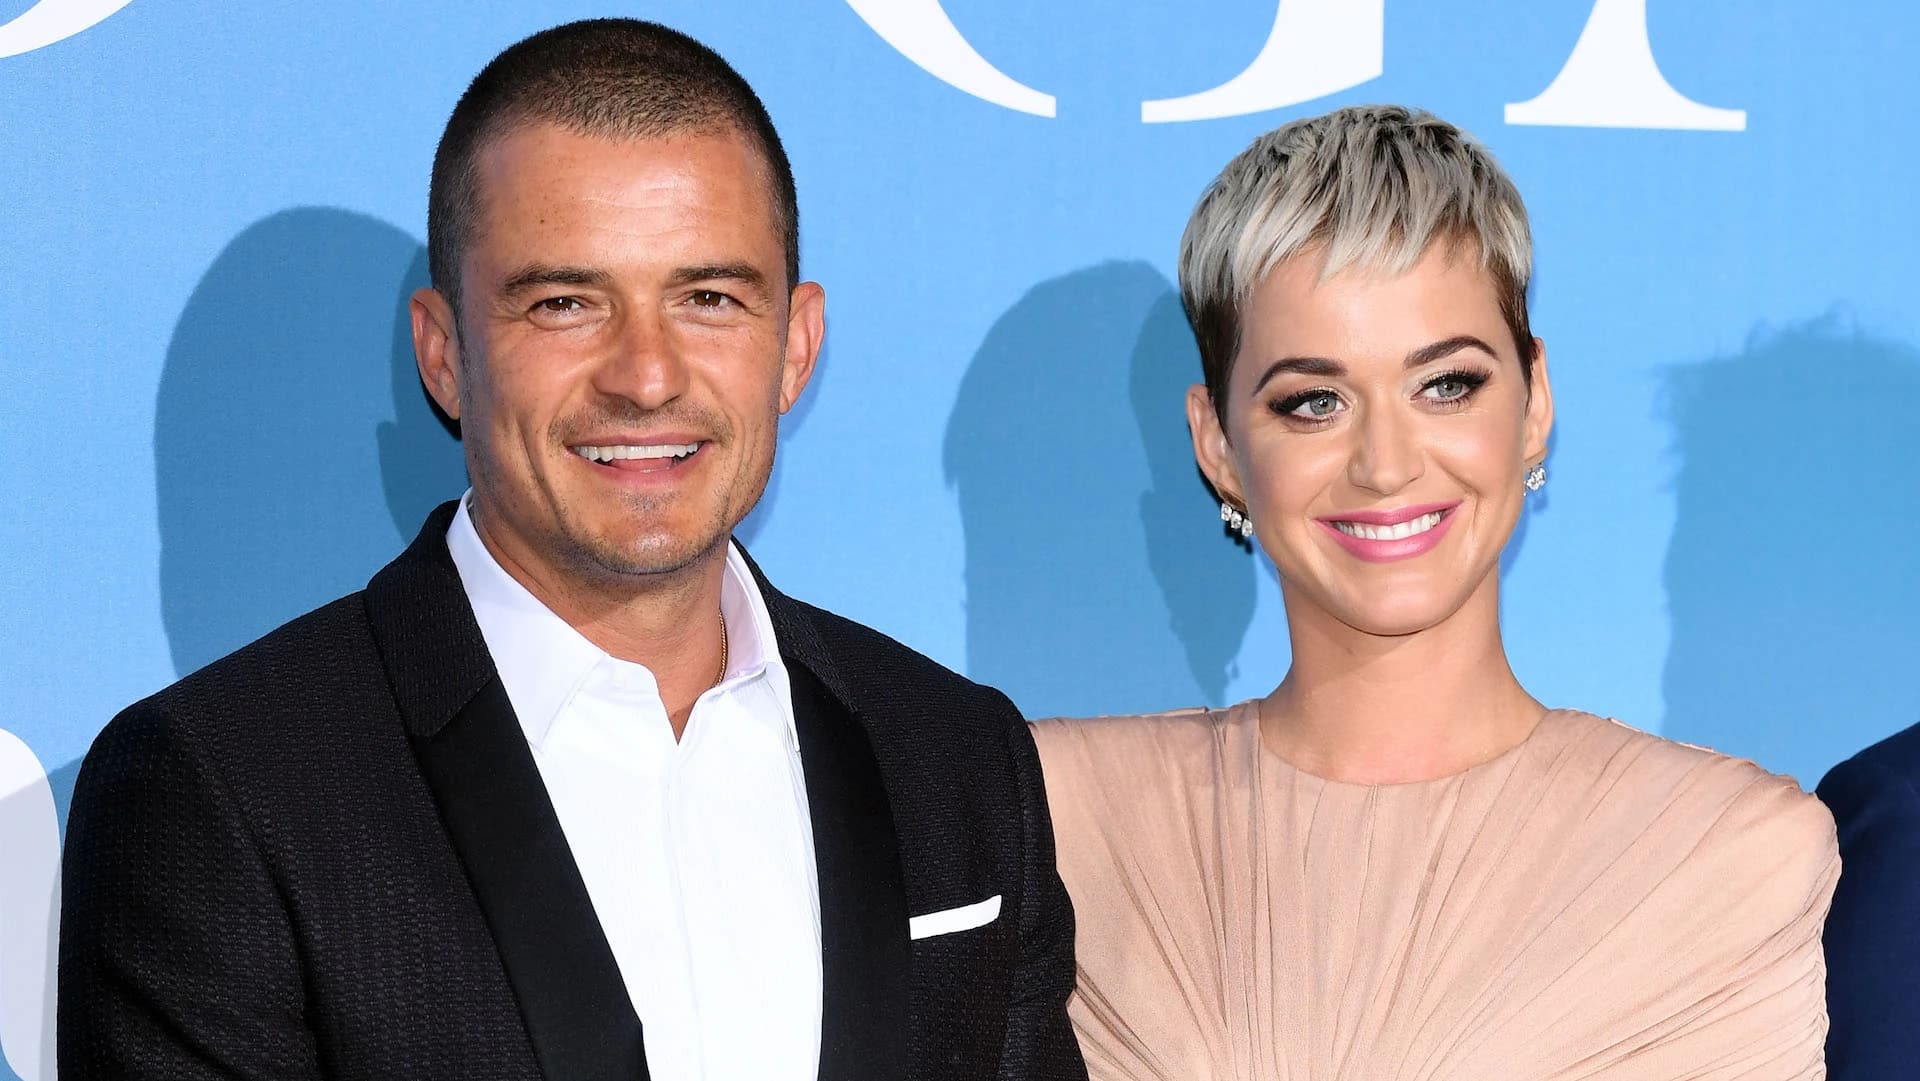 are Orlando Bloom and Katy Perry married